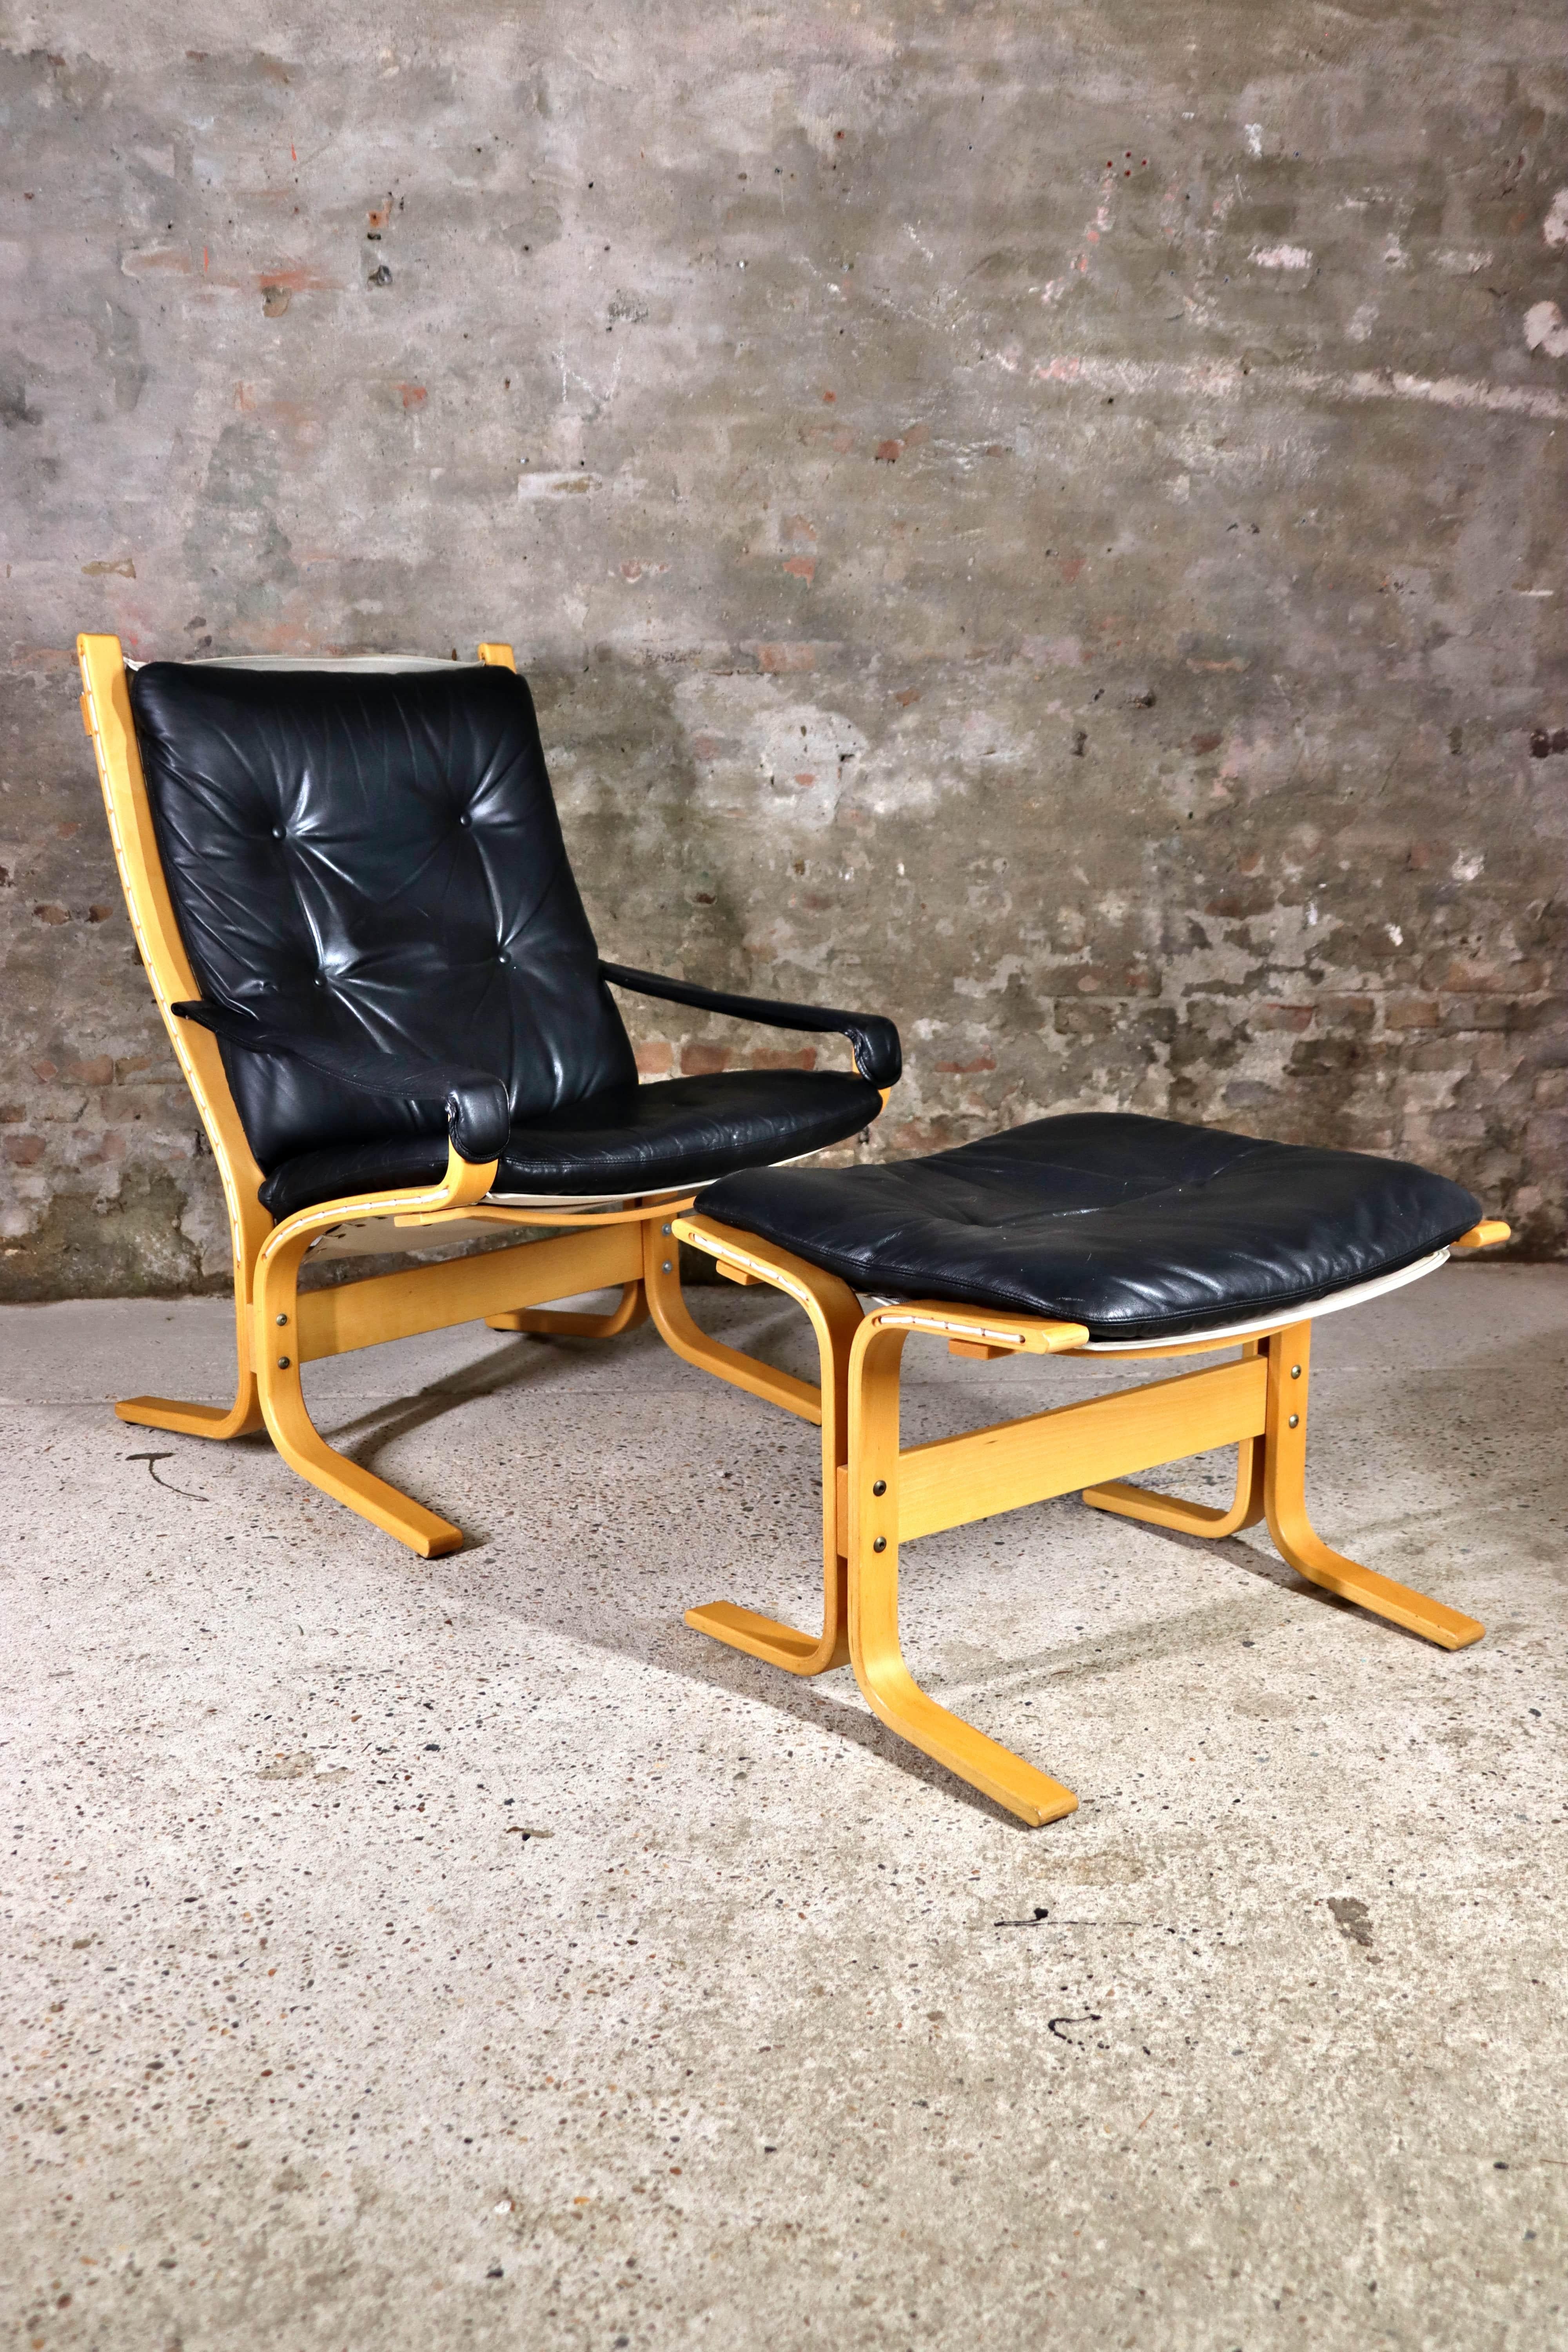 This is a ‘newer’ version of the classic Siesta chair according to the design of Ingmar Relling from the 1960s. This version is still designed by Ingmar Relling but created by the Norwegian manufacturer Ekornes. Both chair and ottoman are in good